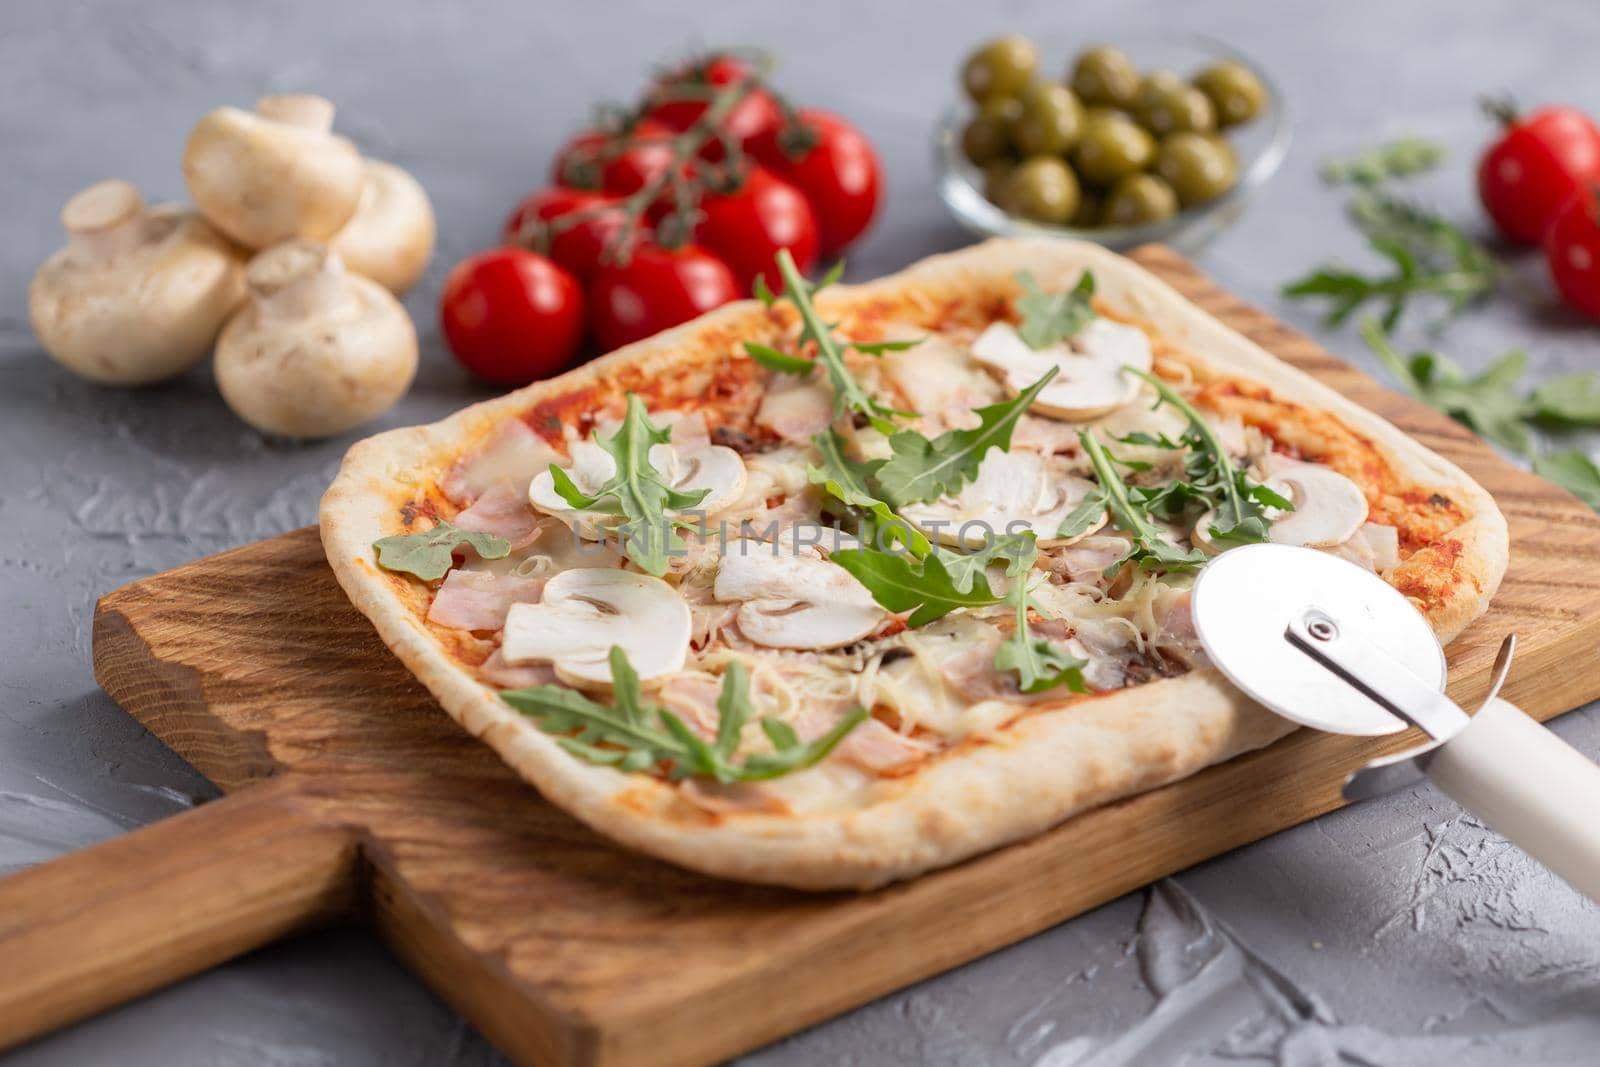 Rectangular pizza with mushrooms, tomatoes and arugula on a wooden cutting board.